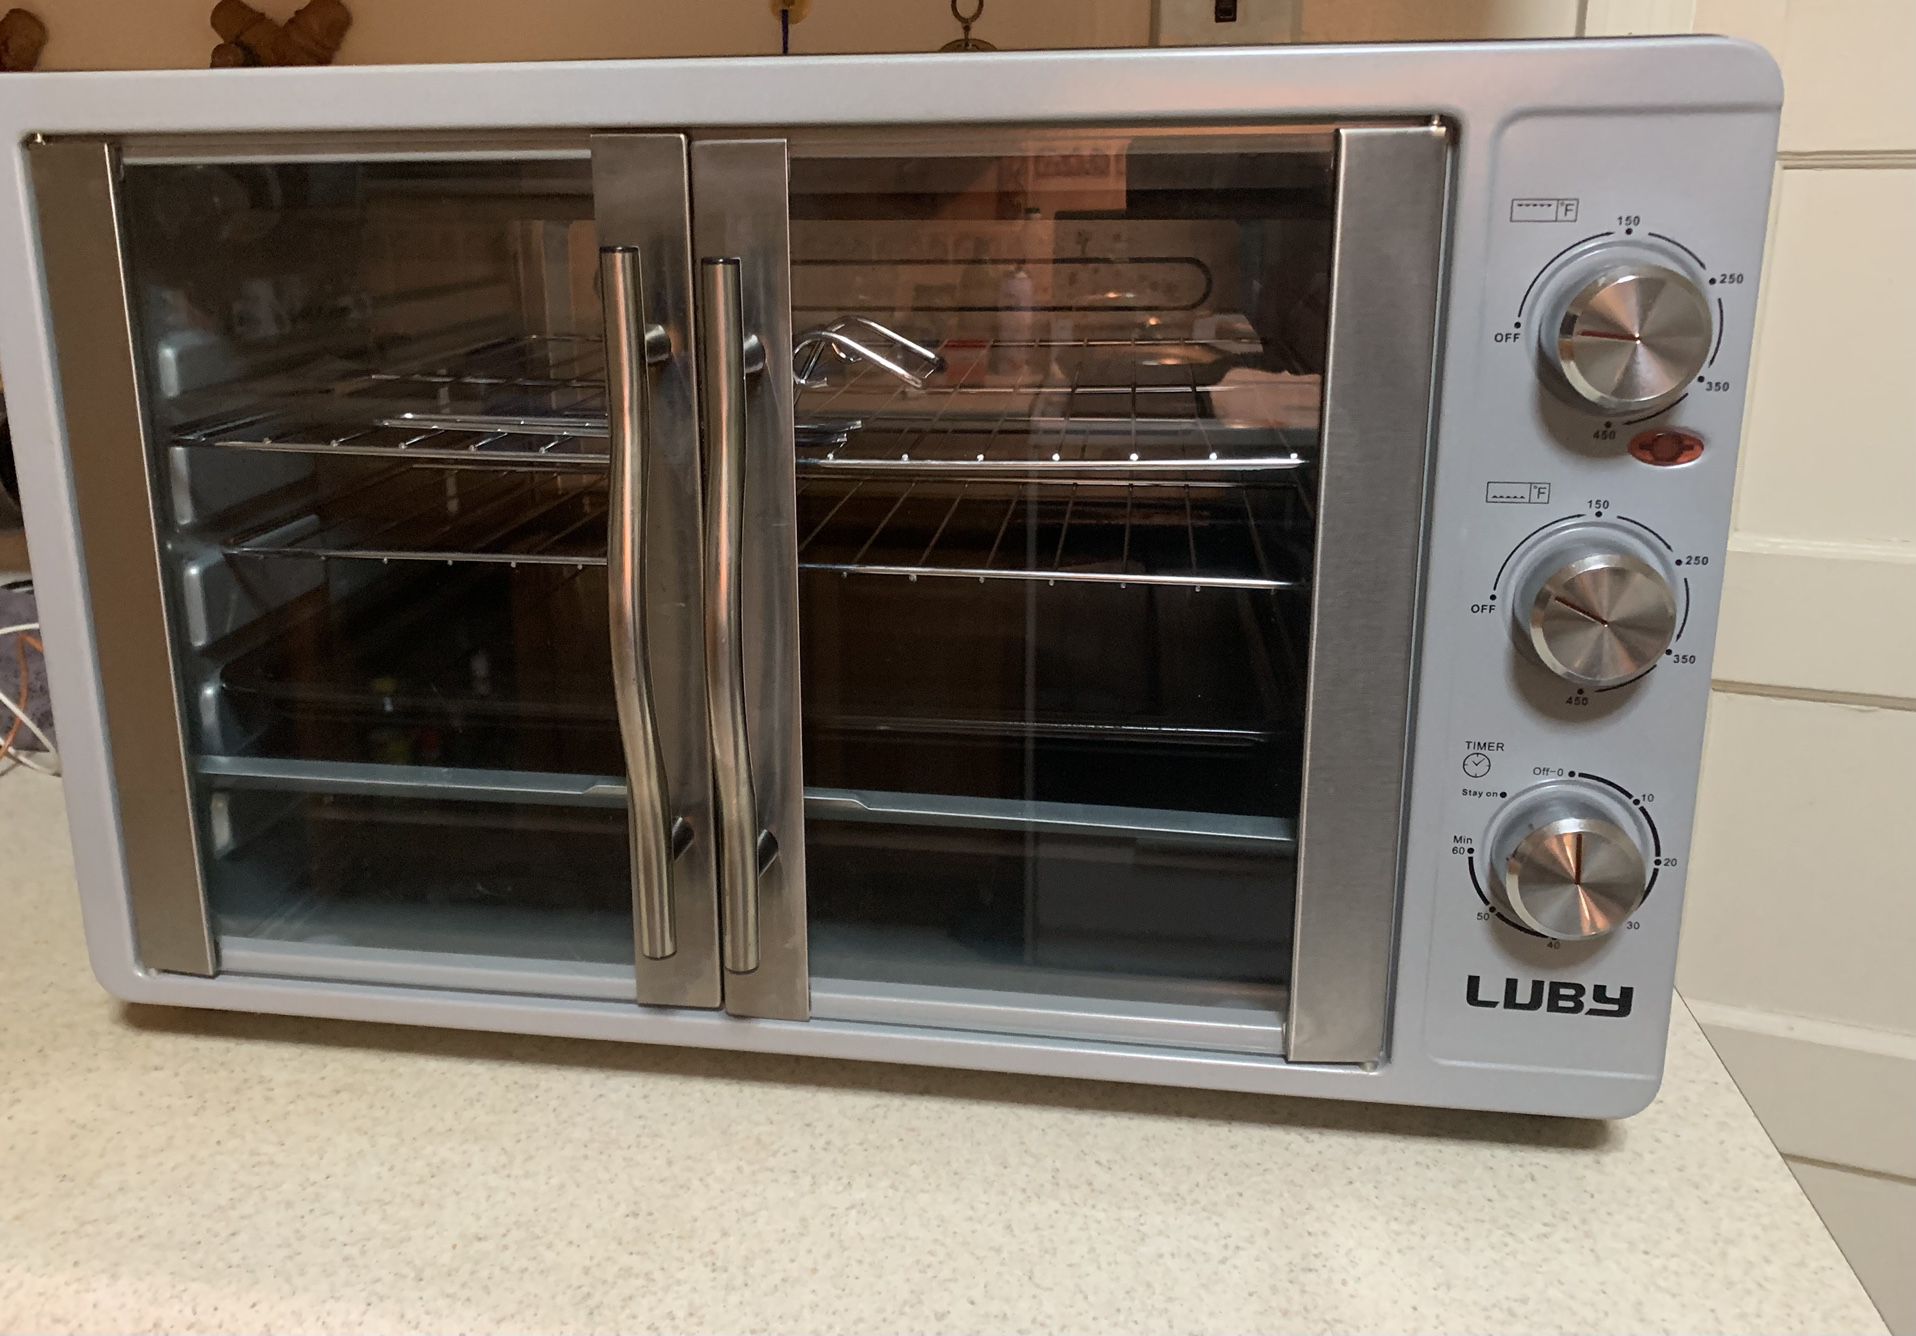 Oster Convection Oven, 8-in-1 Countertop Toaster Oven, XL Fits 2 16  Pizzas, Stainless Steel French Door for Sale in Los Angeles, CA - OfferUp